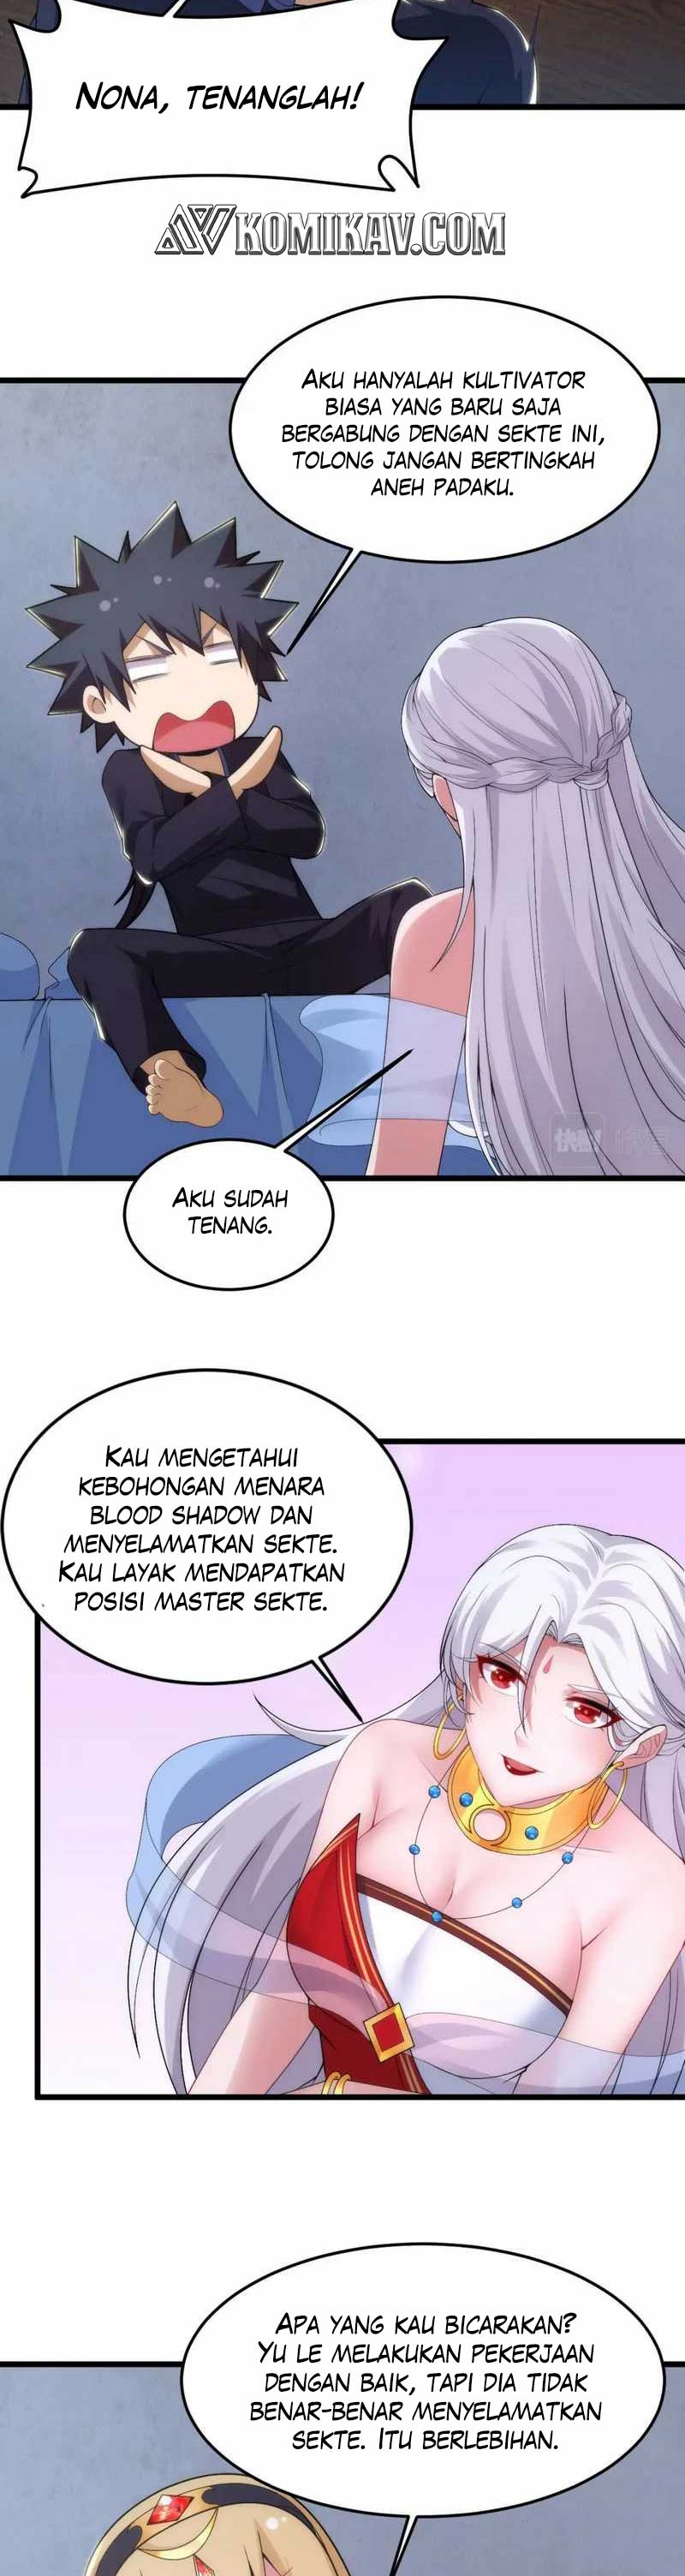 Dilarang COPAS - situs resmi www.mangacanblog.com - Komik i just want to be beaten to death by everyone 138 - chapter 138 139 Indonesia i just want to be beaten to death by everyone 138 - chapter 138 Terbaru 3|Baca Manga Komik Indonesia|Mangacan